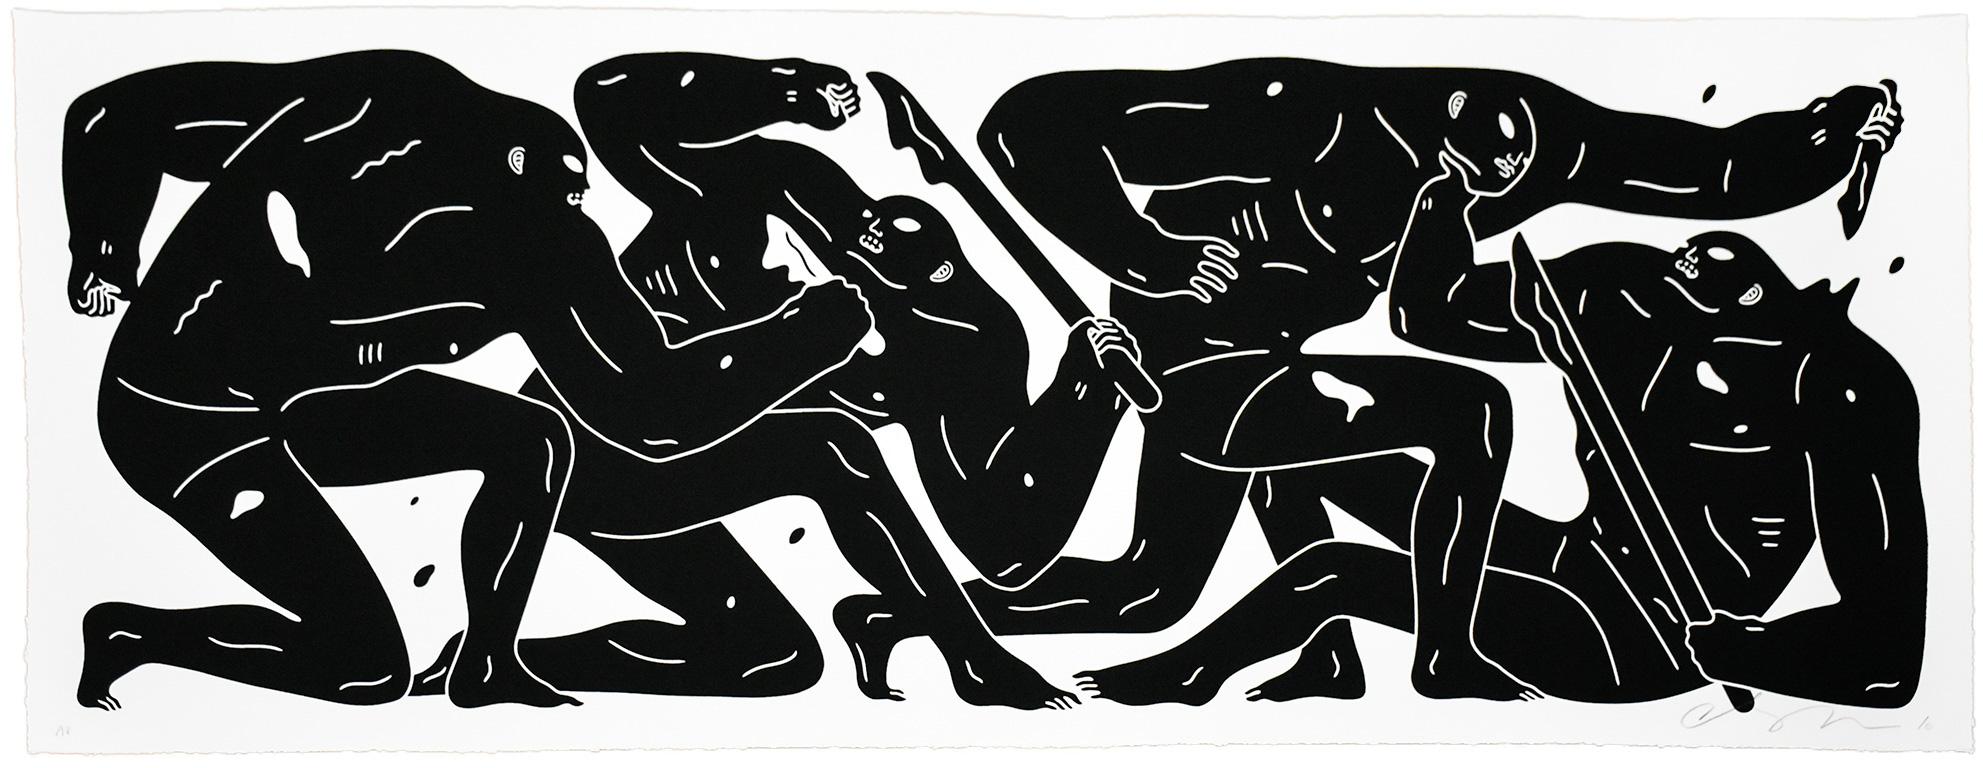 CLEON PETERSON The Return (Black Artist Proof) - Print by Cleon Peterson